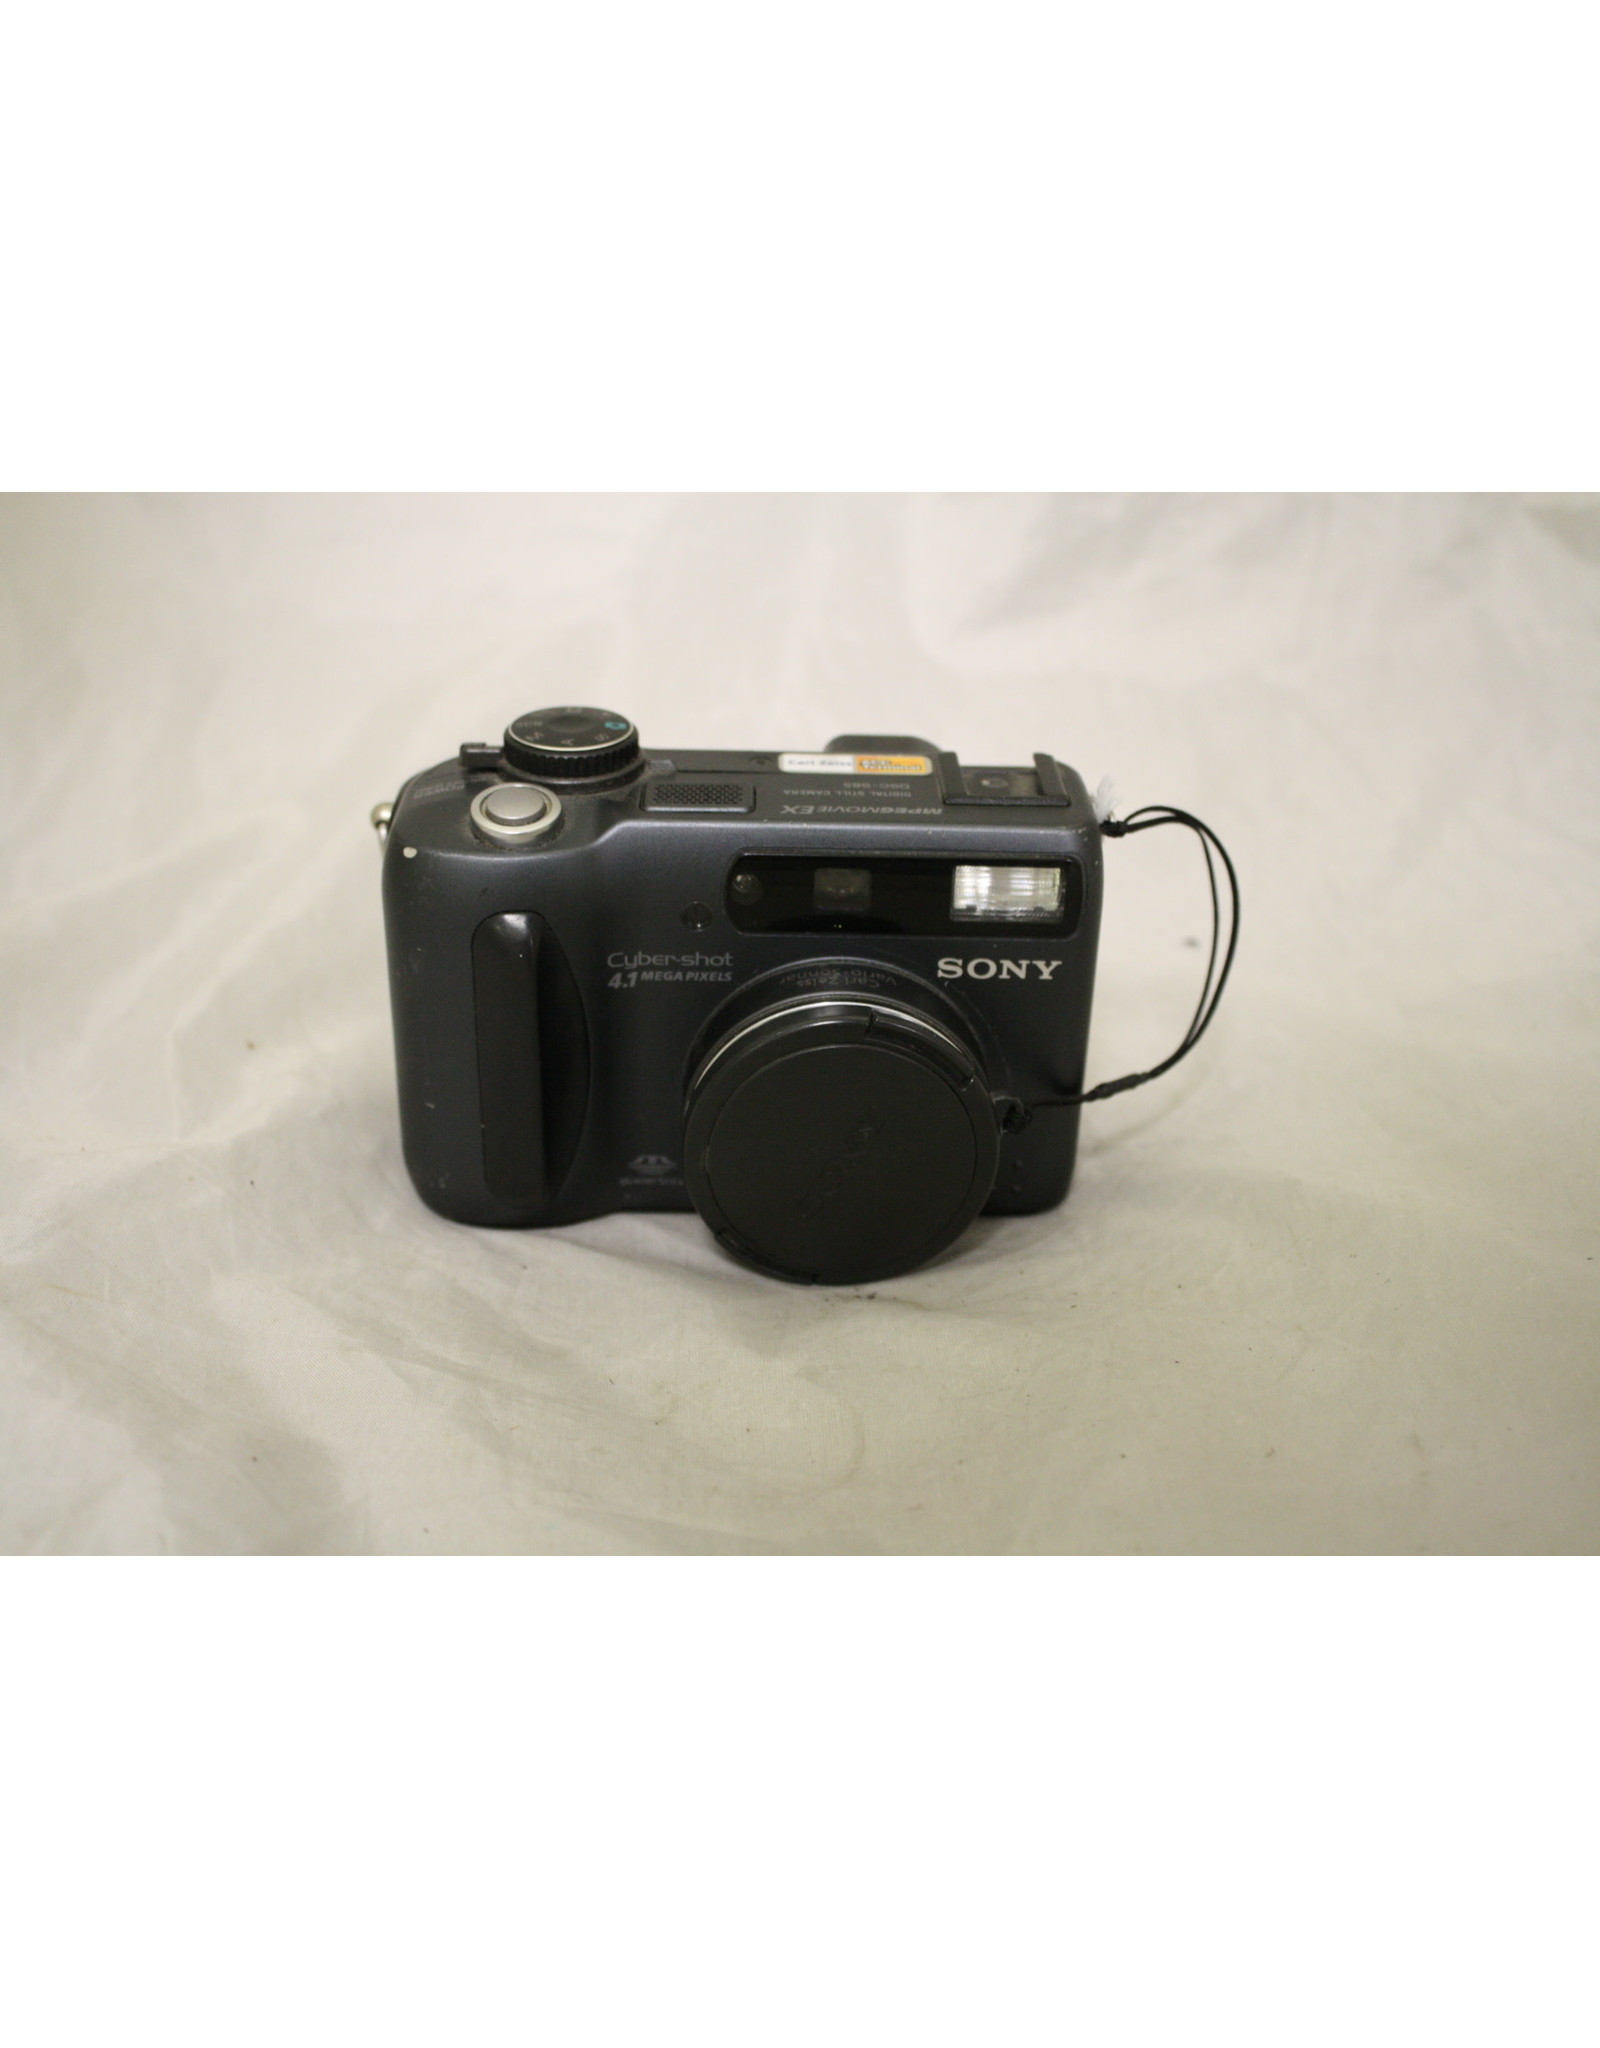 Sony Cyber-Shot DSC-S85 4.1 MP Digital Camera (Missing charger)  (Pre-owned)